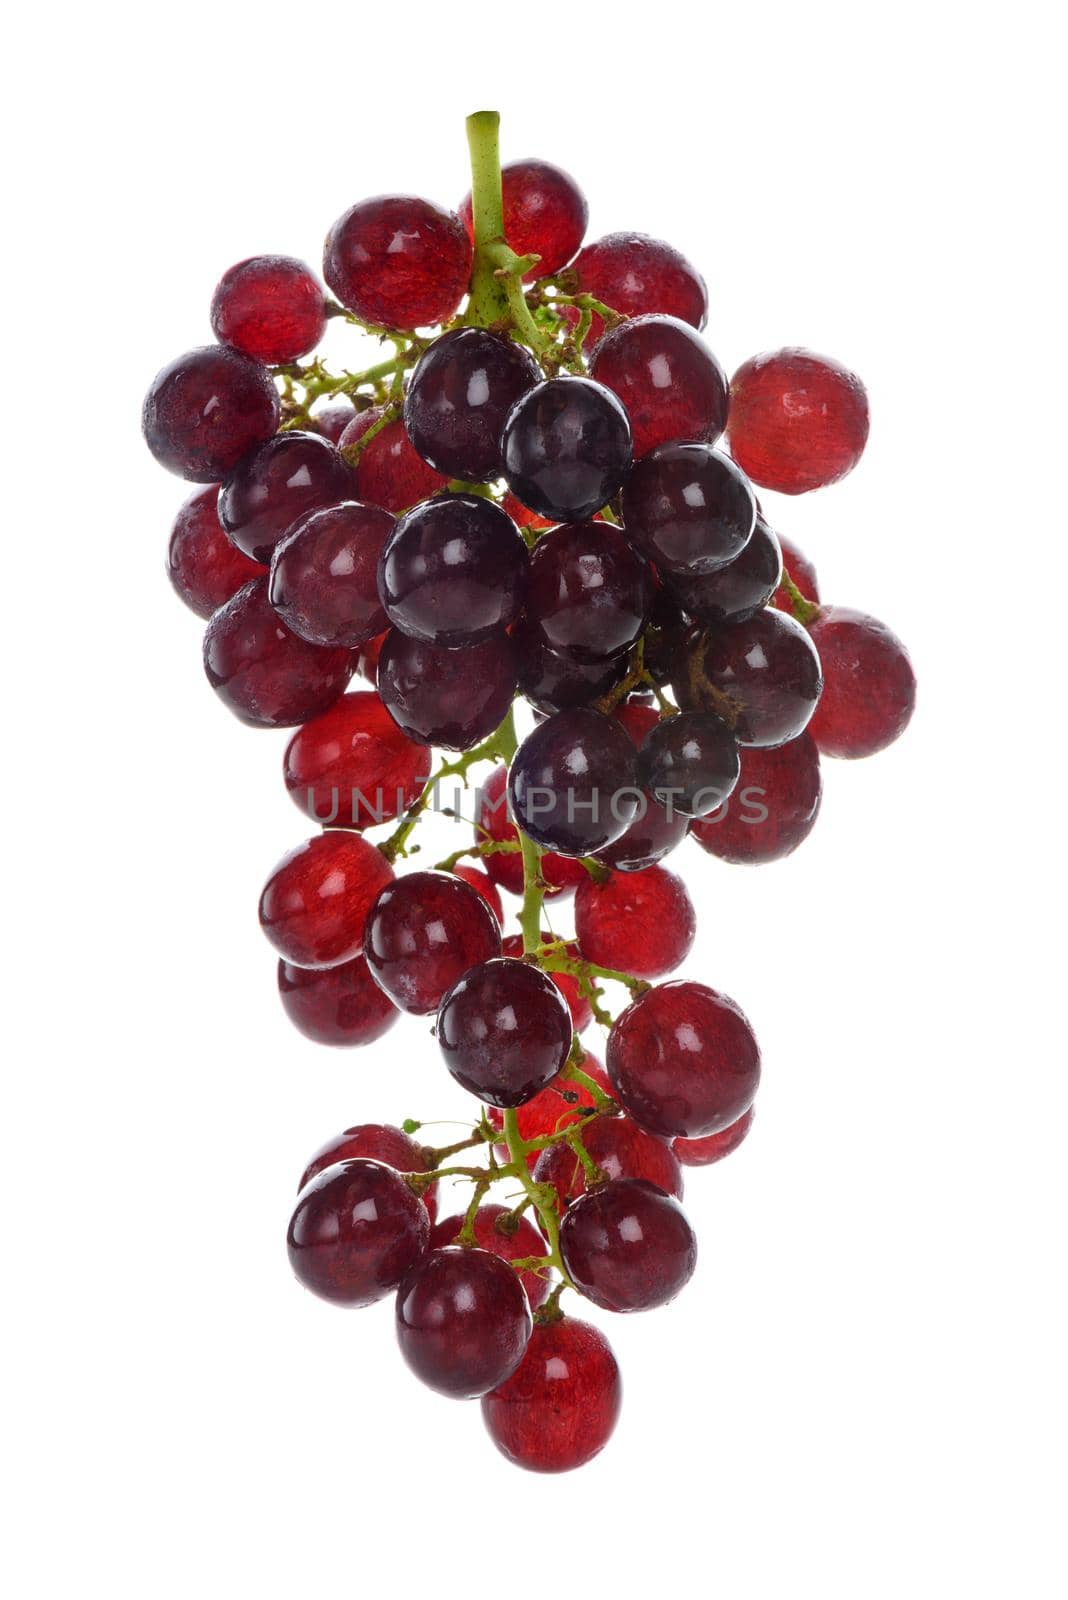 isolate bunch of fresh red grapes on white background